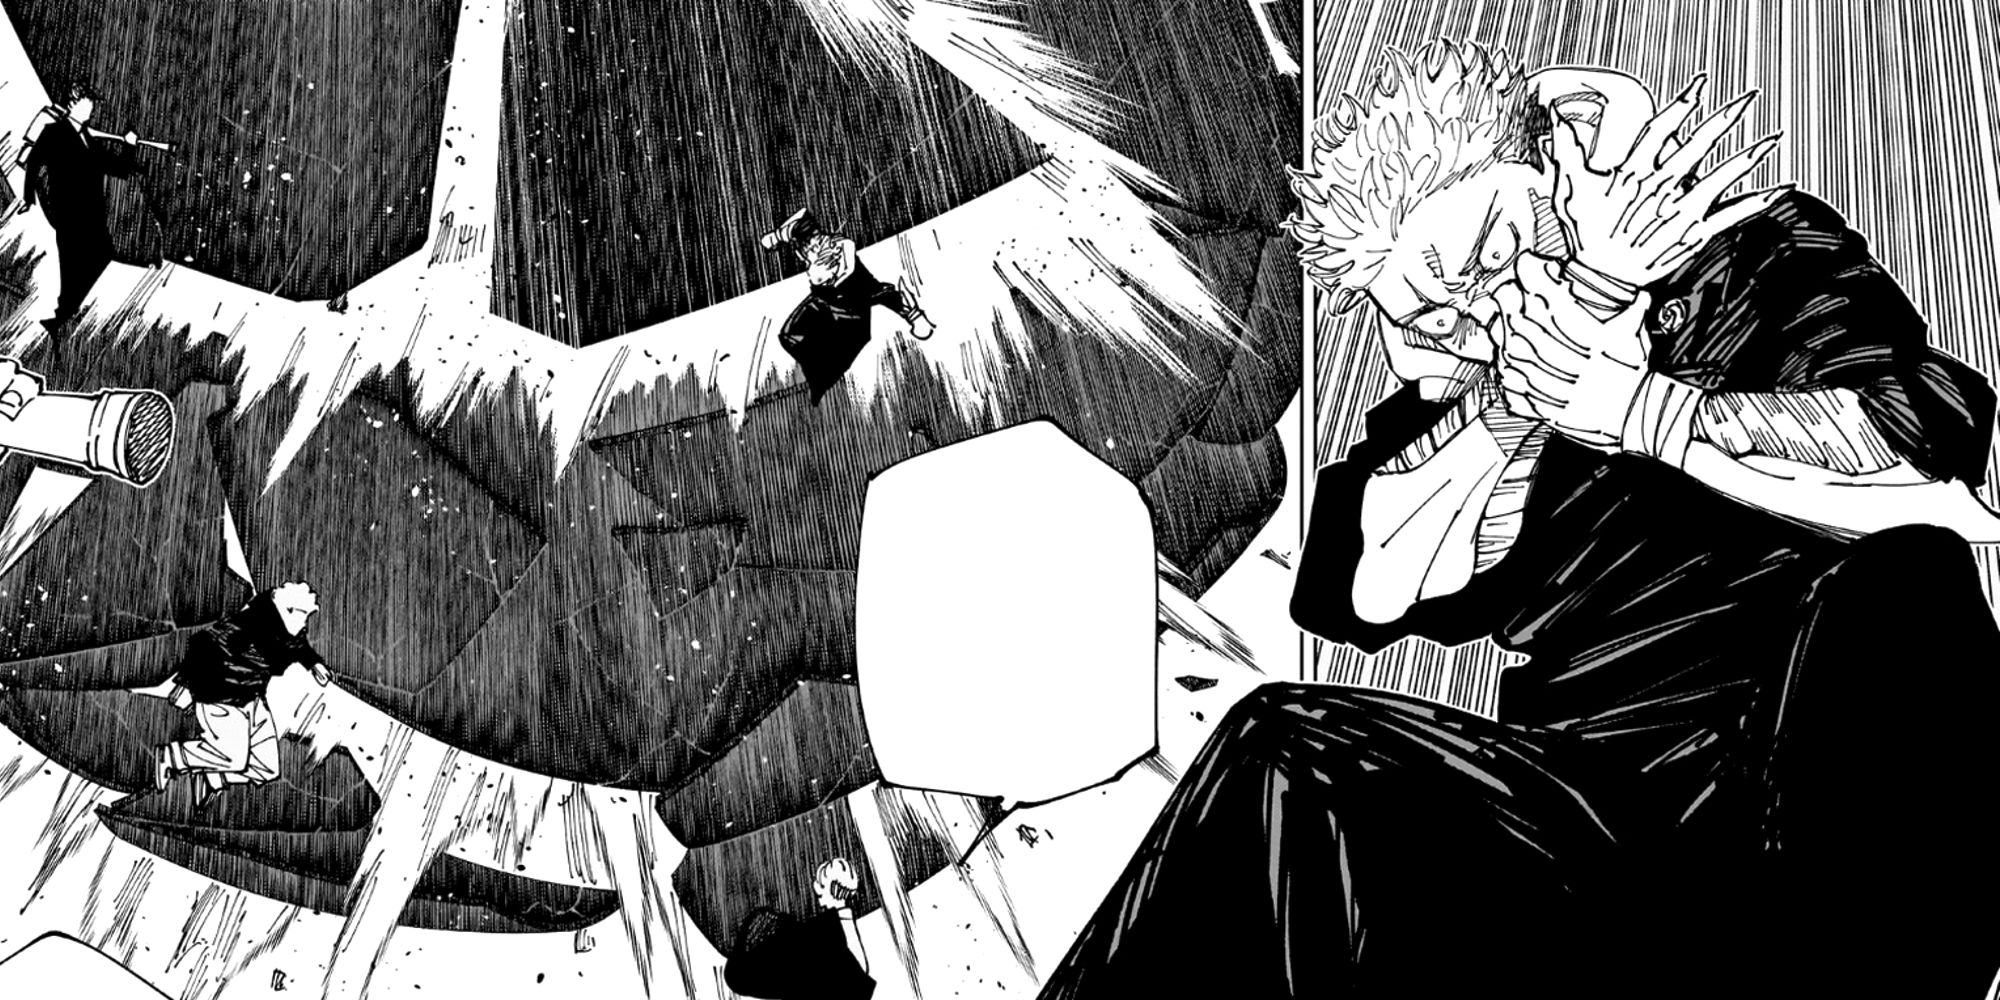 Jujutsu Kaisen Finally Gives Yuji the Much-Needed Power-Up He’s Always Deserved